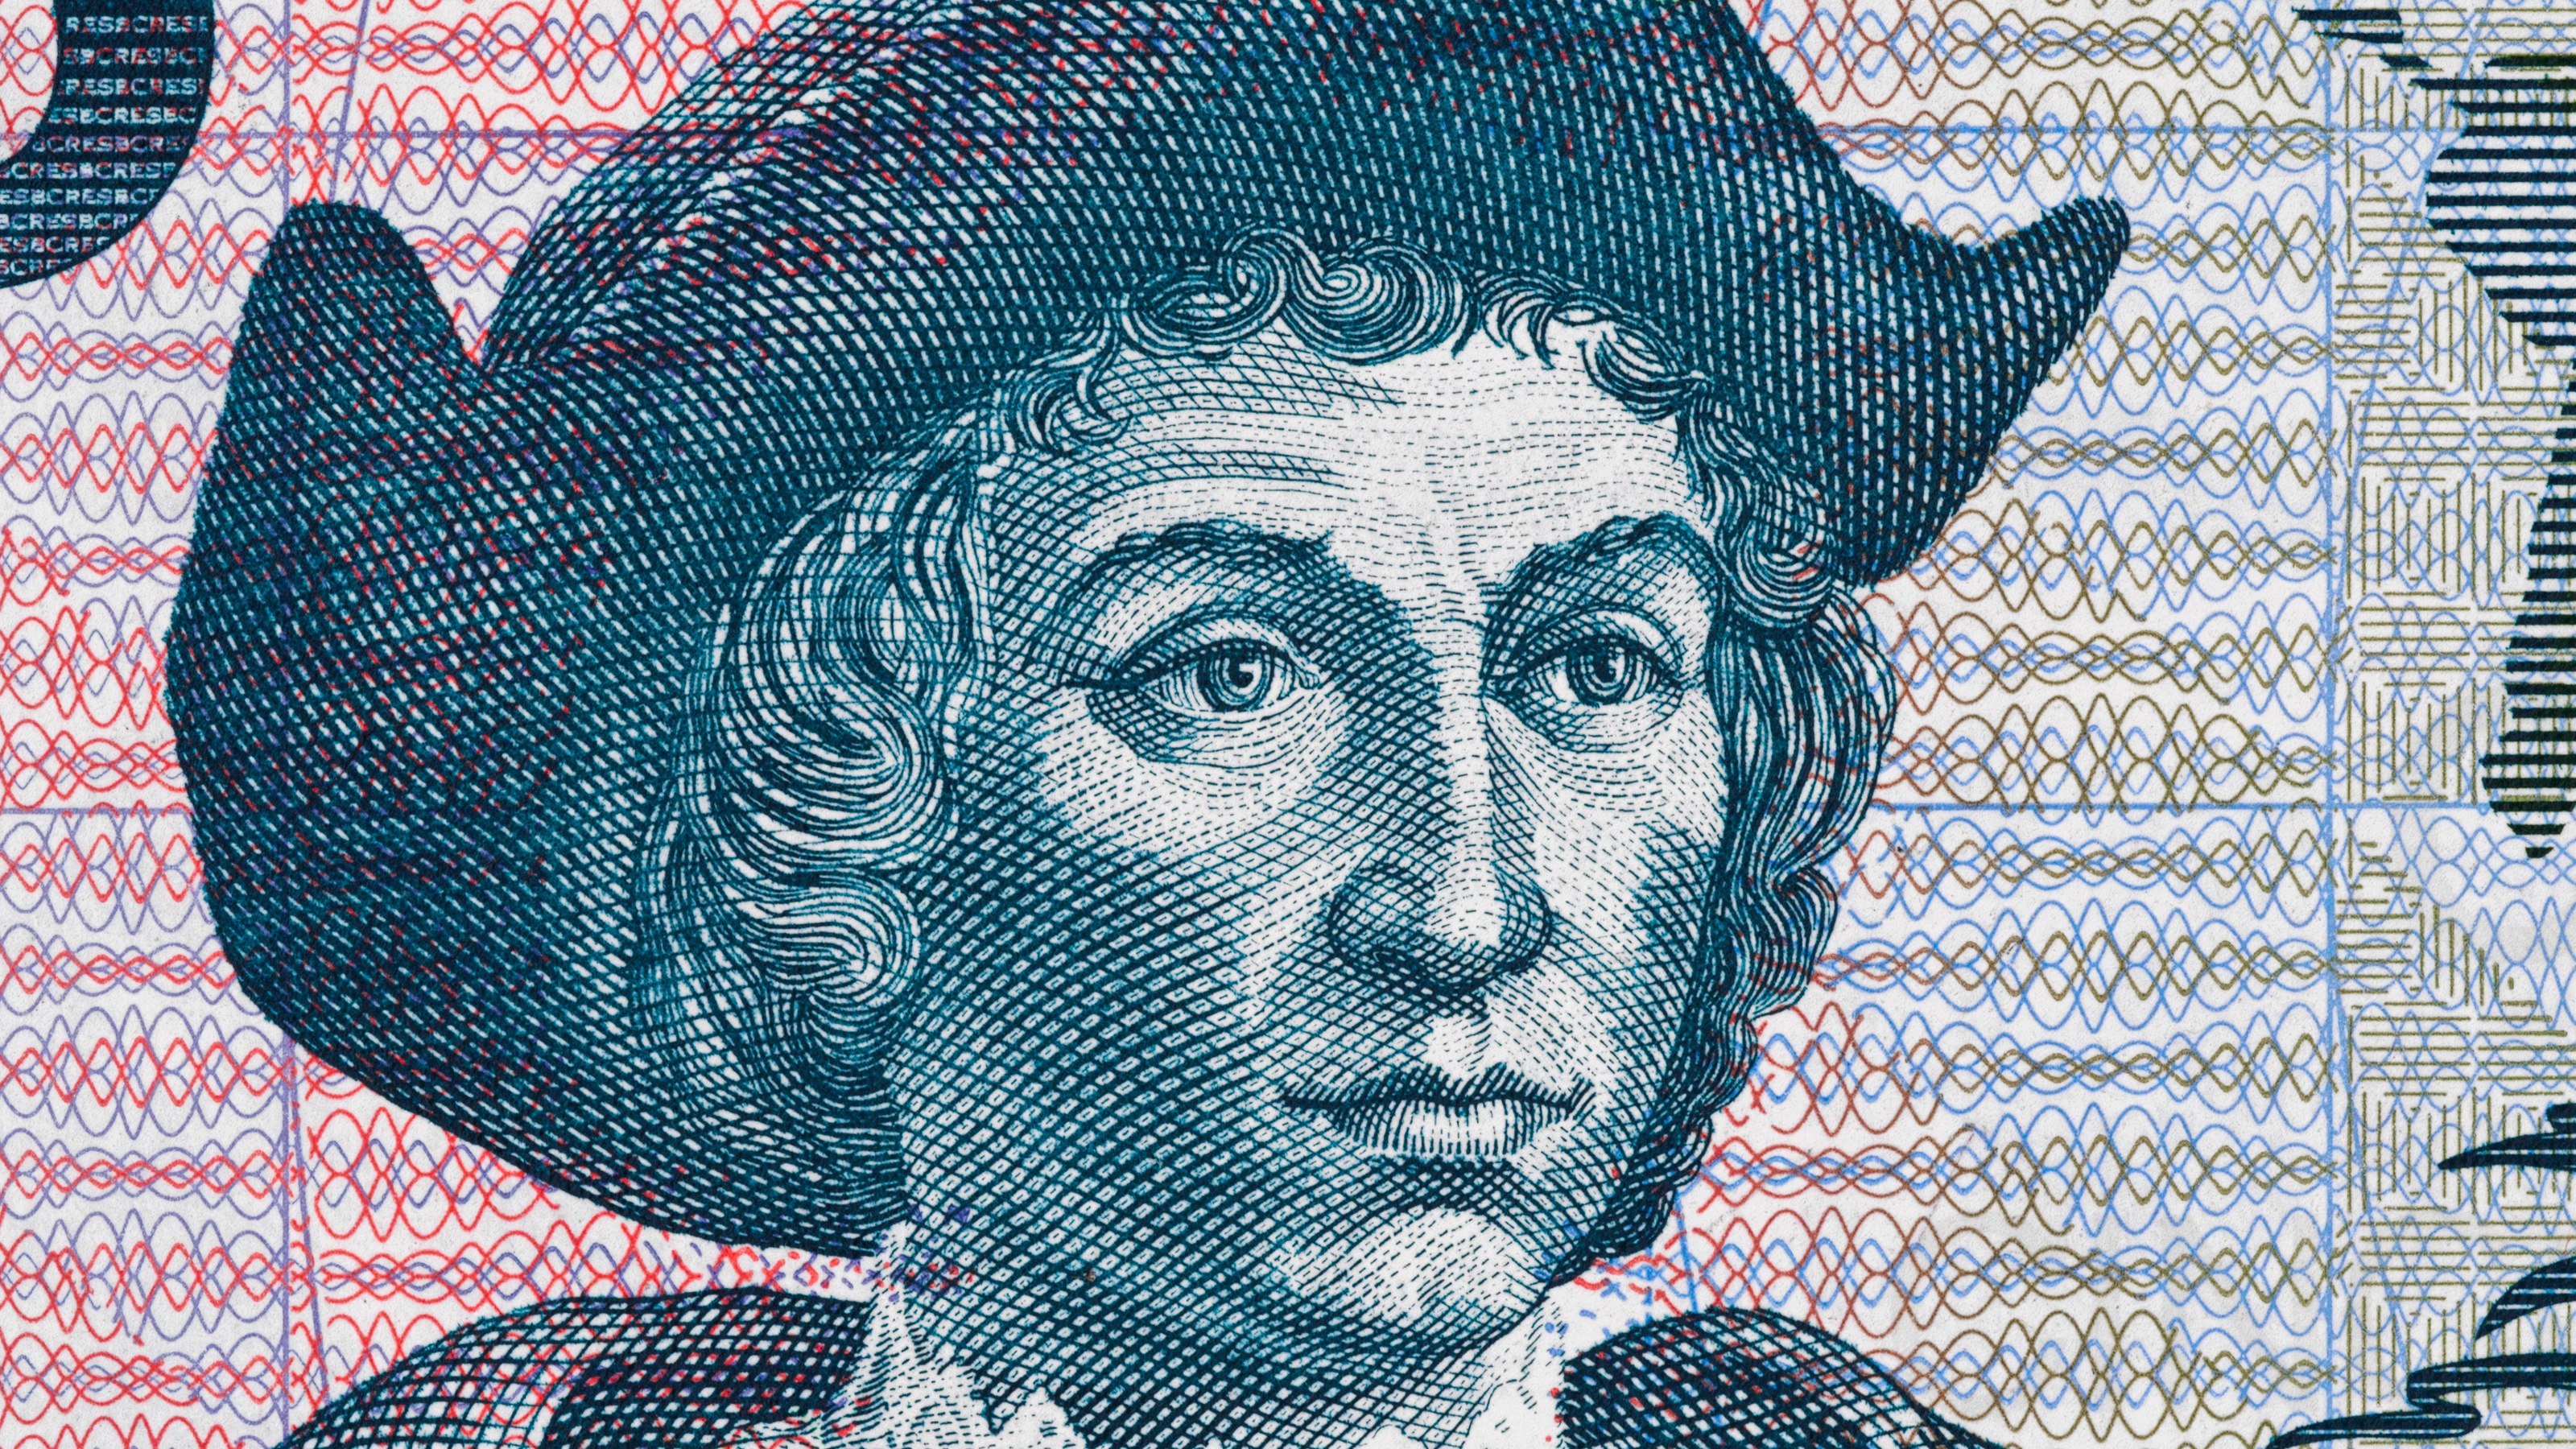 A banknote with a portrait of a man in a hat.